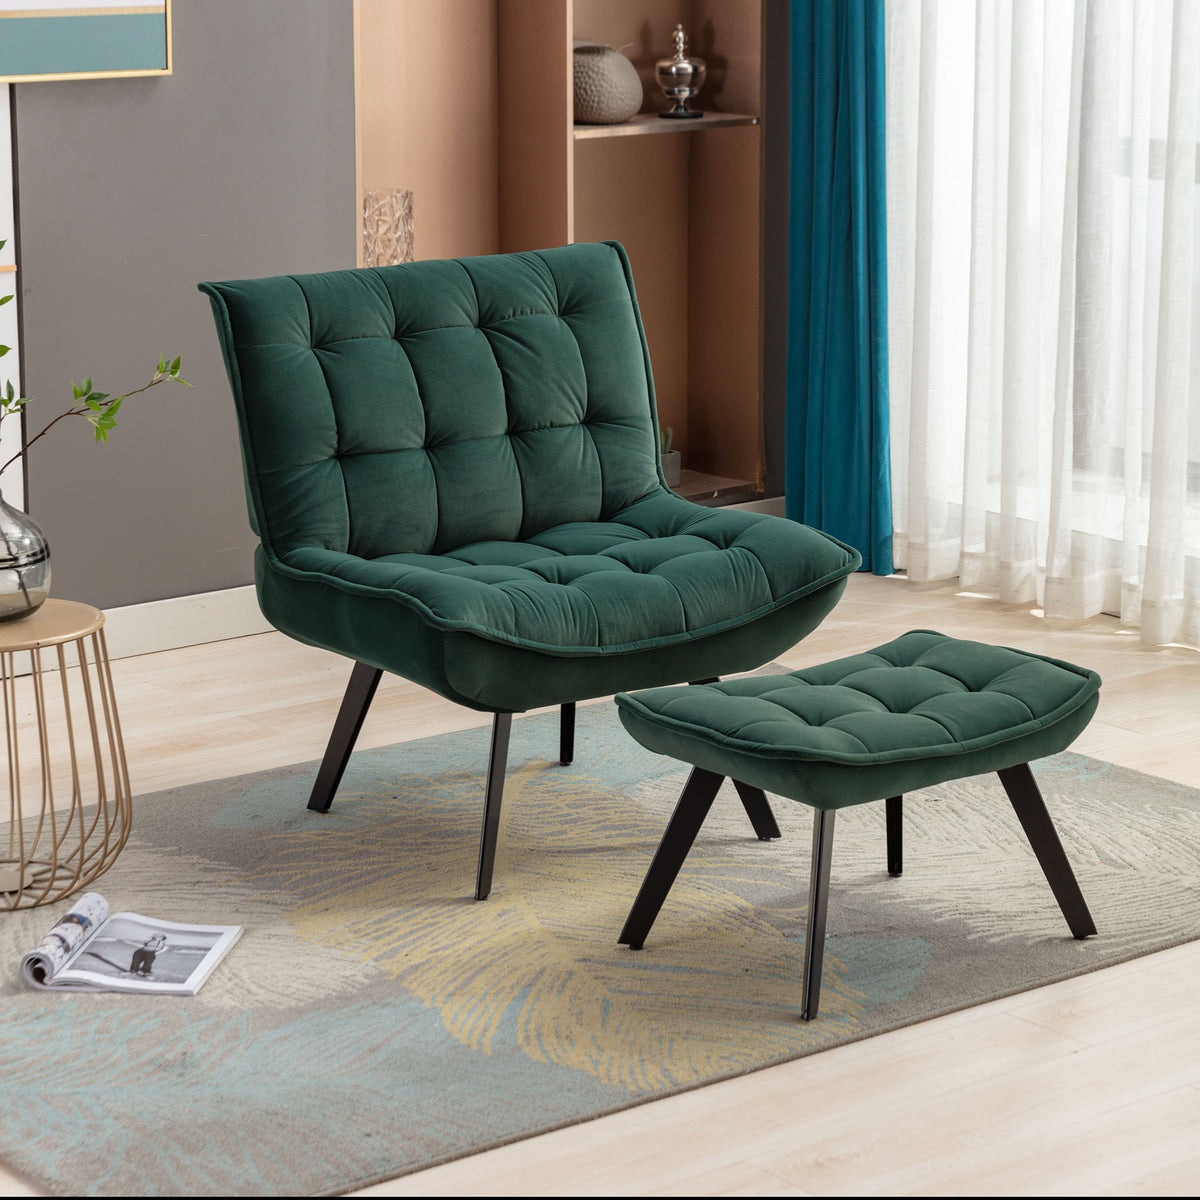 Modern Soft Velvet Fabric Material Large Width Accent Chair Leisure Chair Armchair TV Chair Bedroom Chair With Ottoman Black Legs For Indoor Home And Living Room,Dark Green